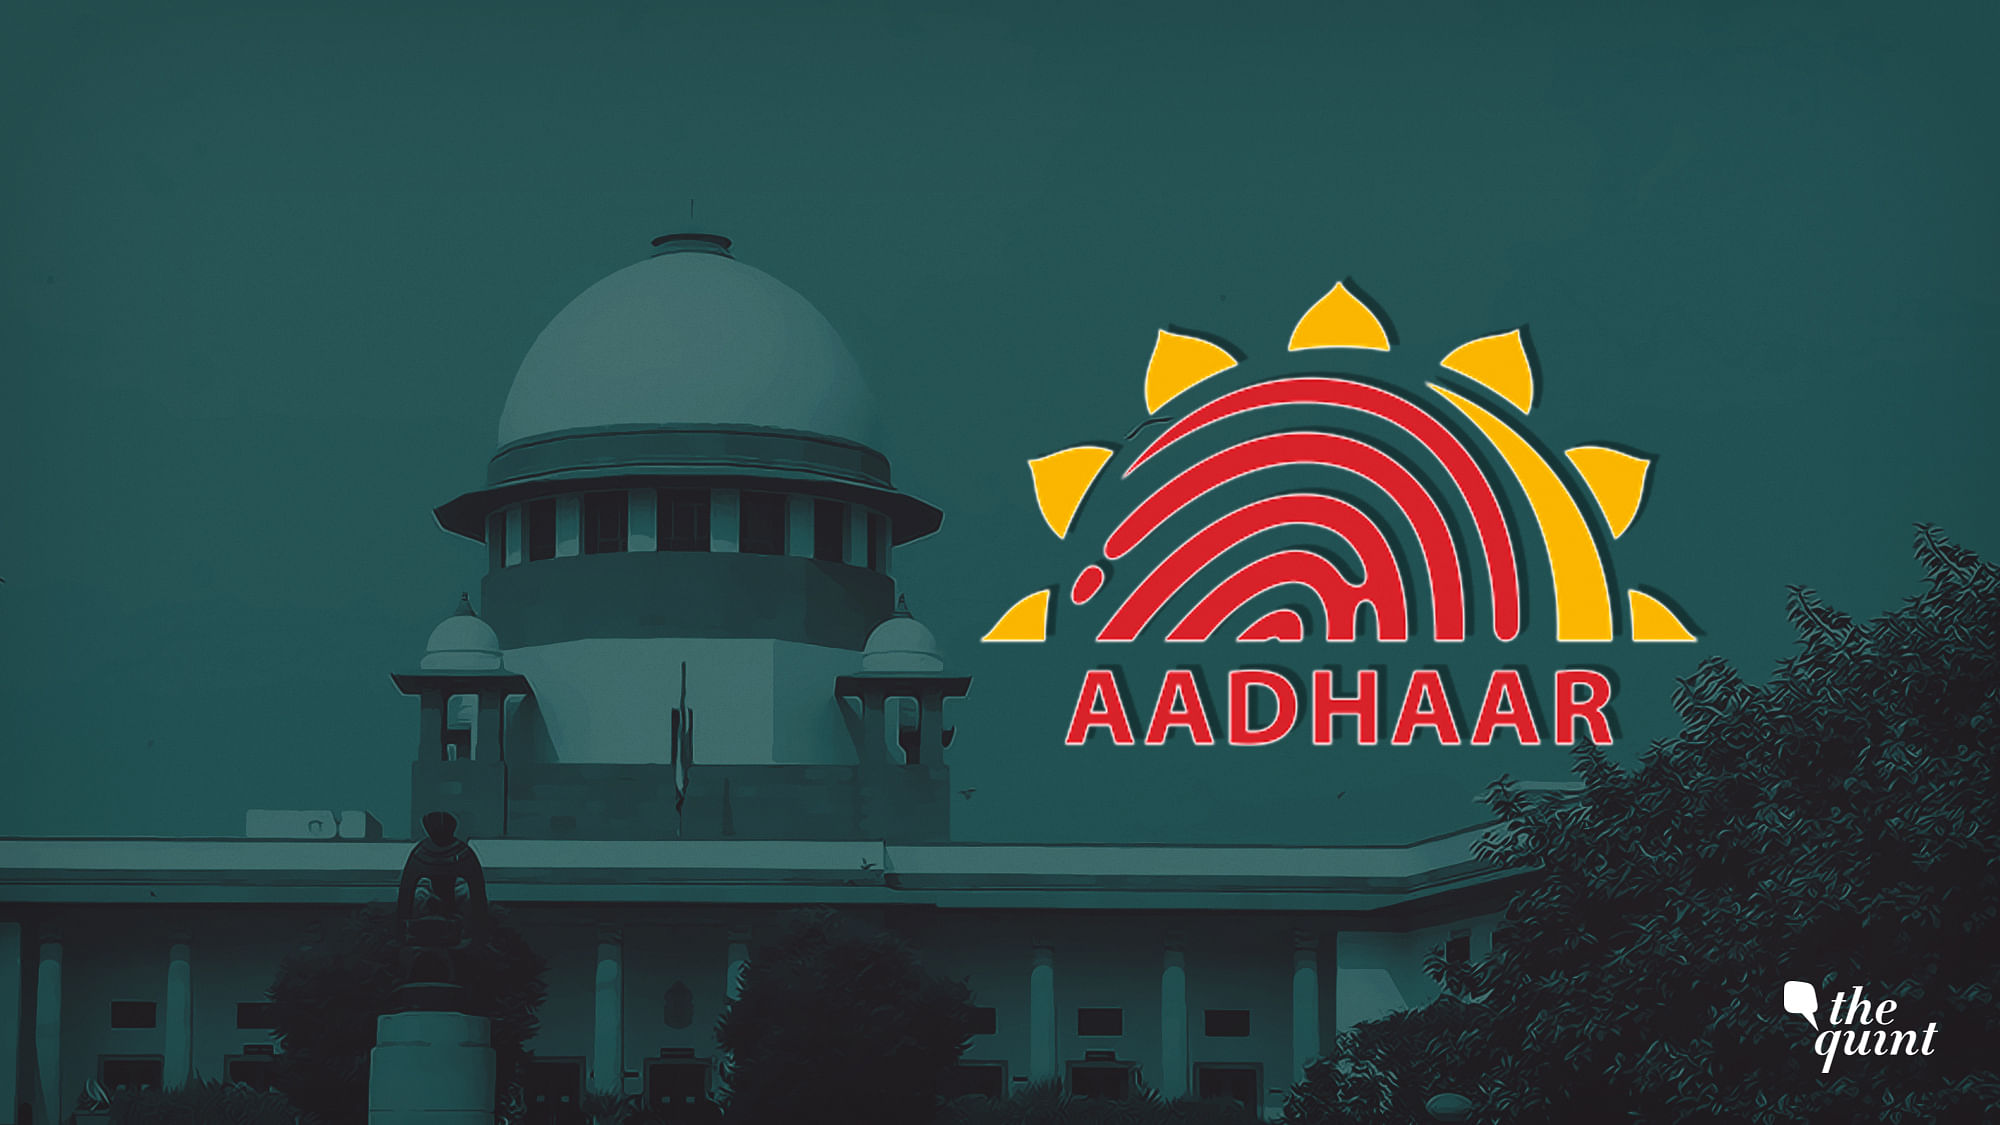 The Supreme Court will be pronouncing the much-awaited judgment on the validity of Aadhaar on Wednesday, 26 September.